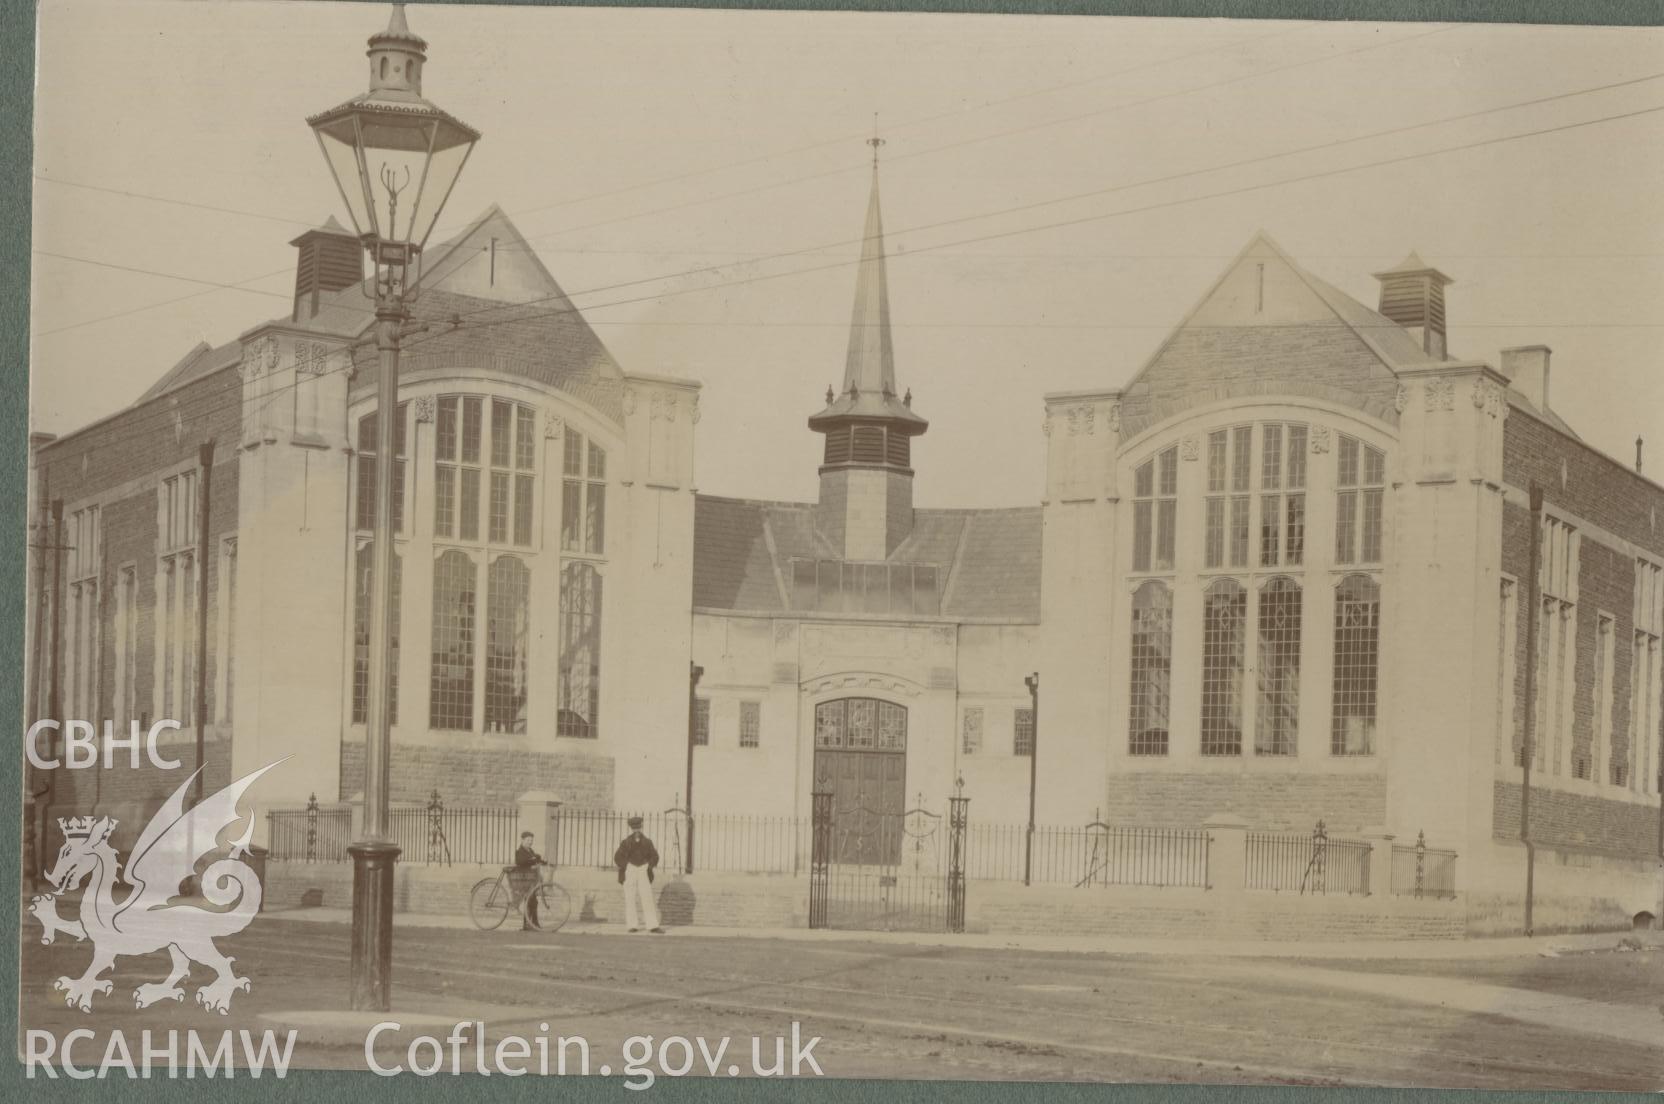 Black and white photograph showing the front exterior of Cathays Public Library, Cardiff.